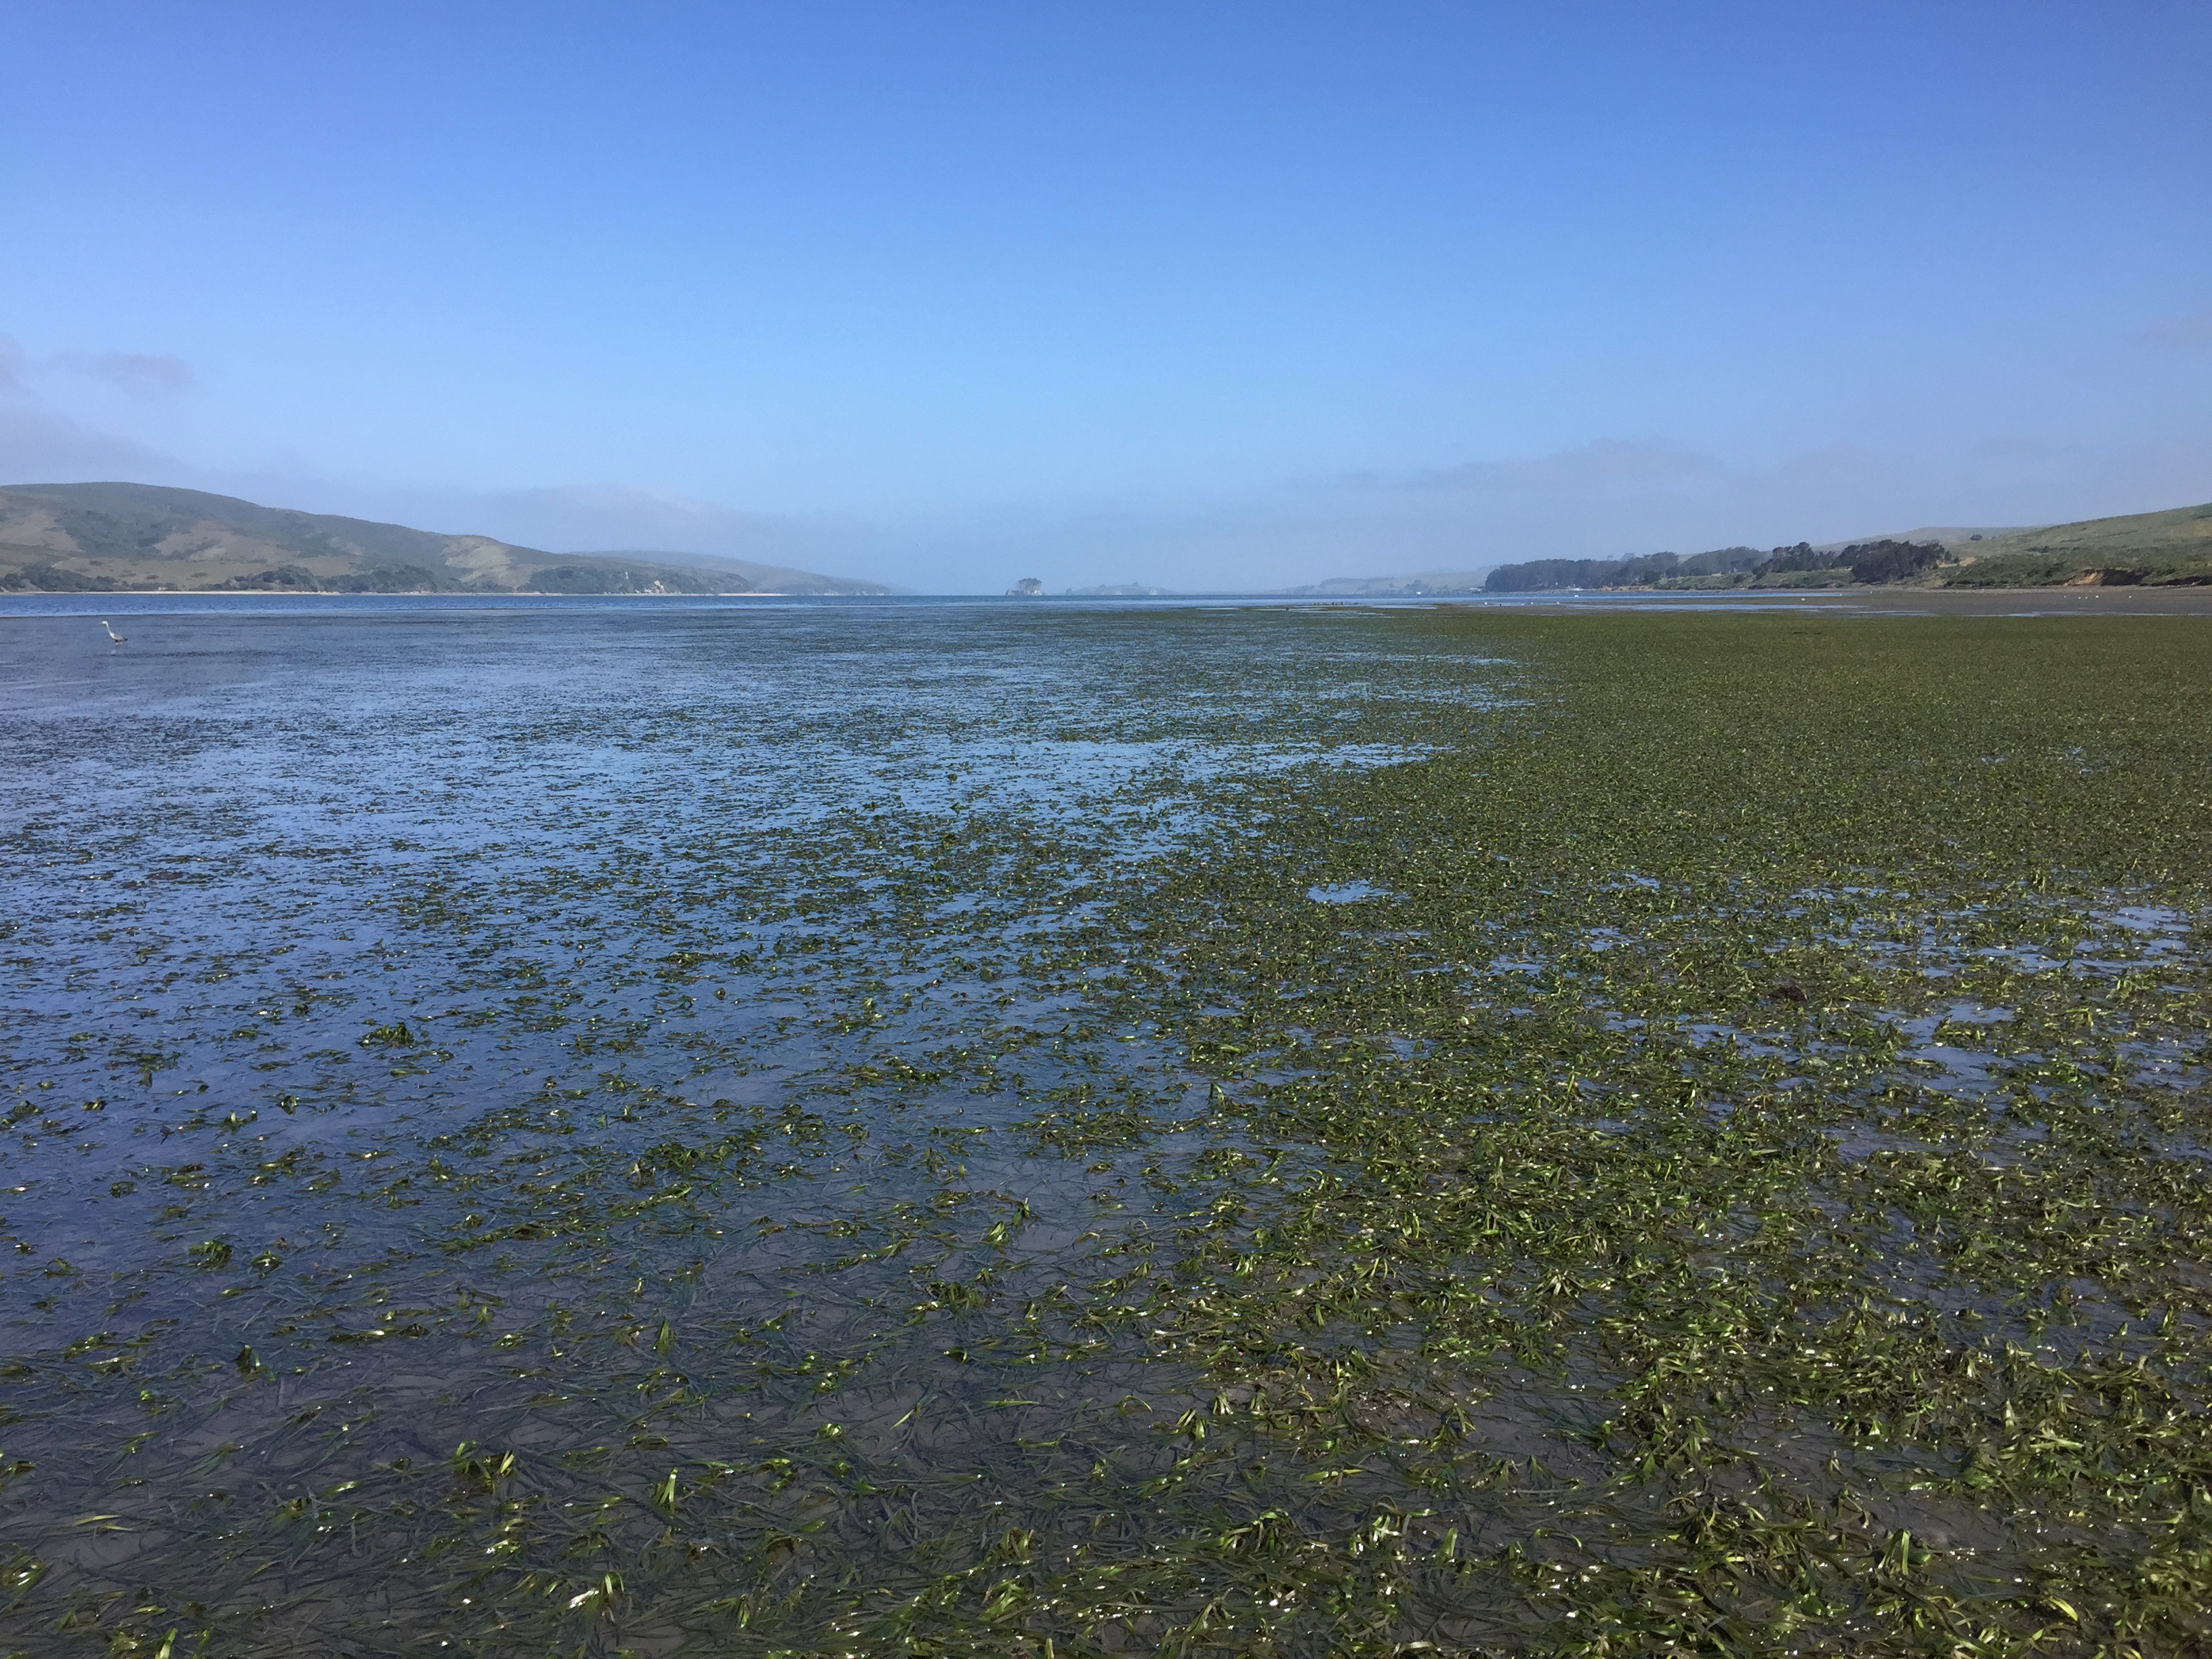 mudflat with seagrass